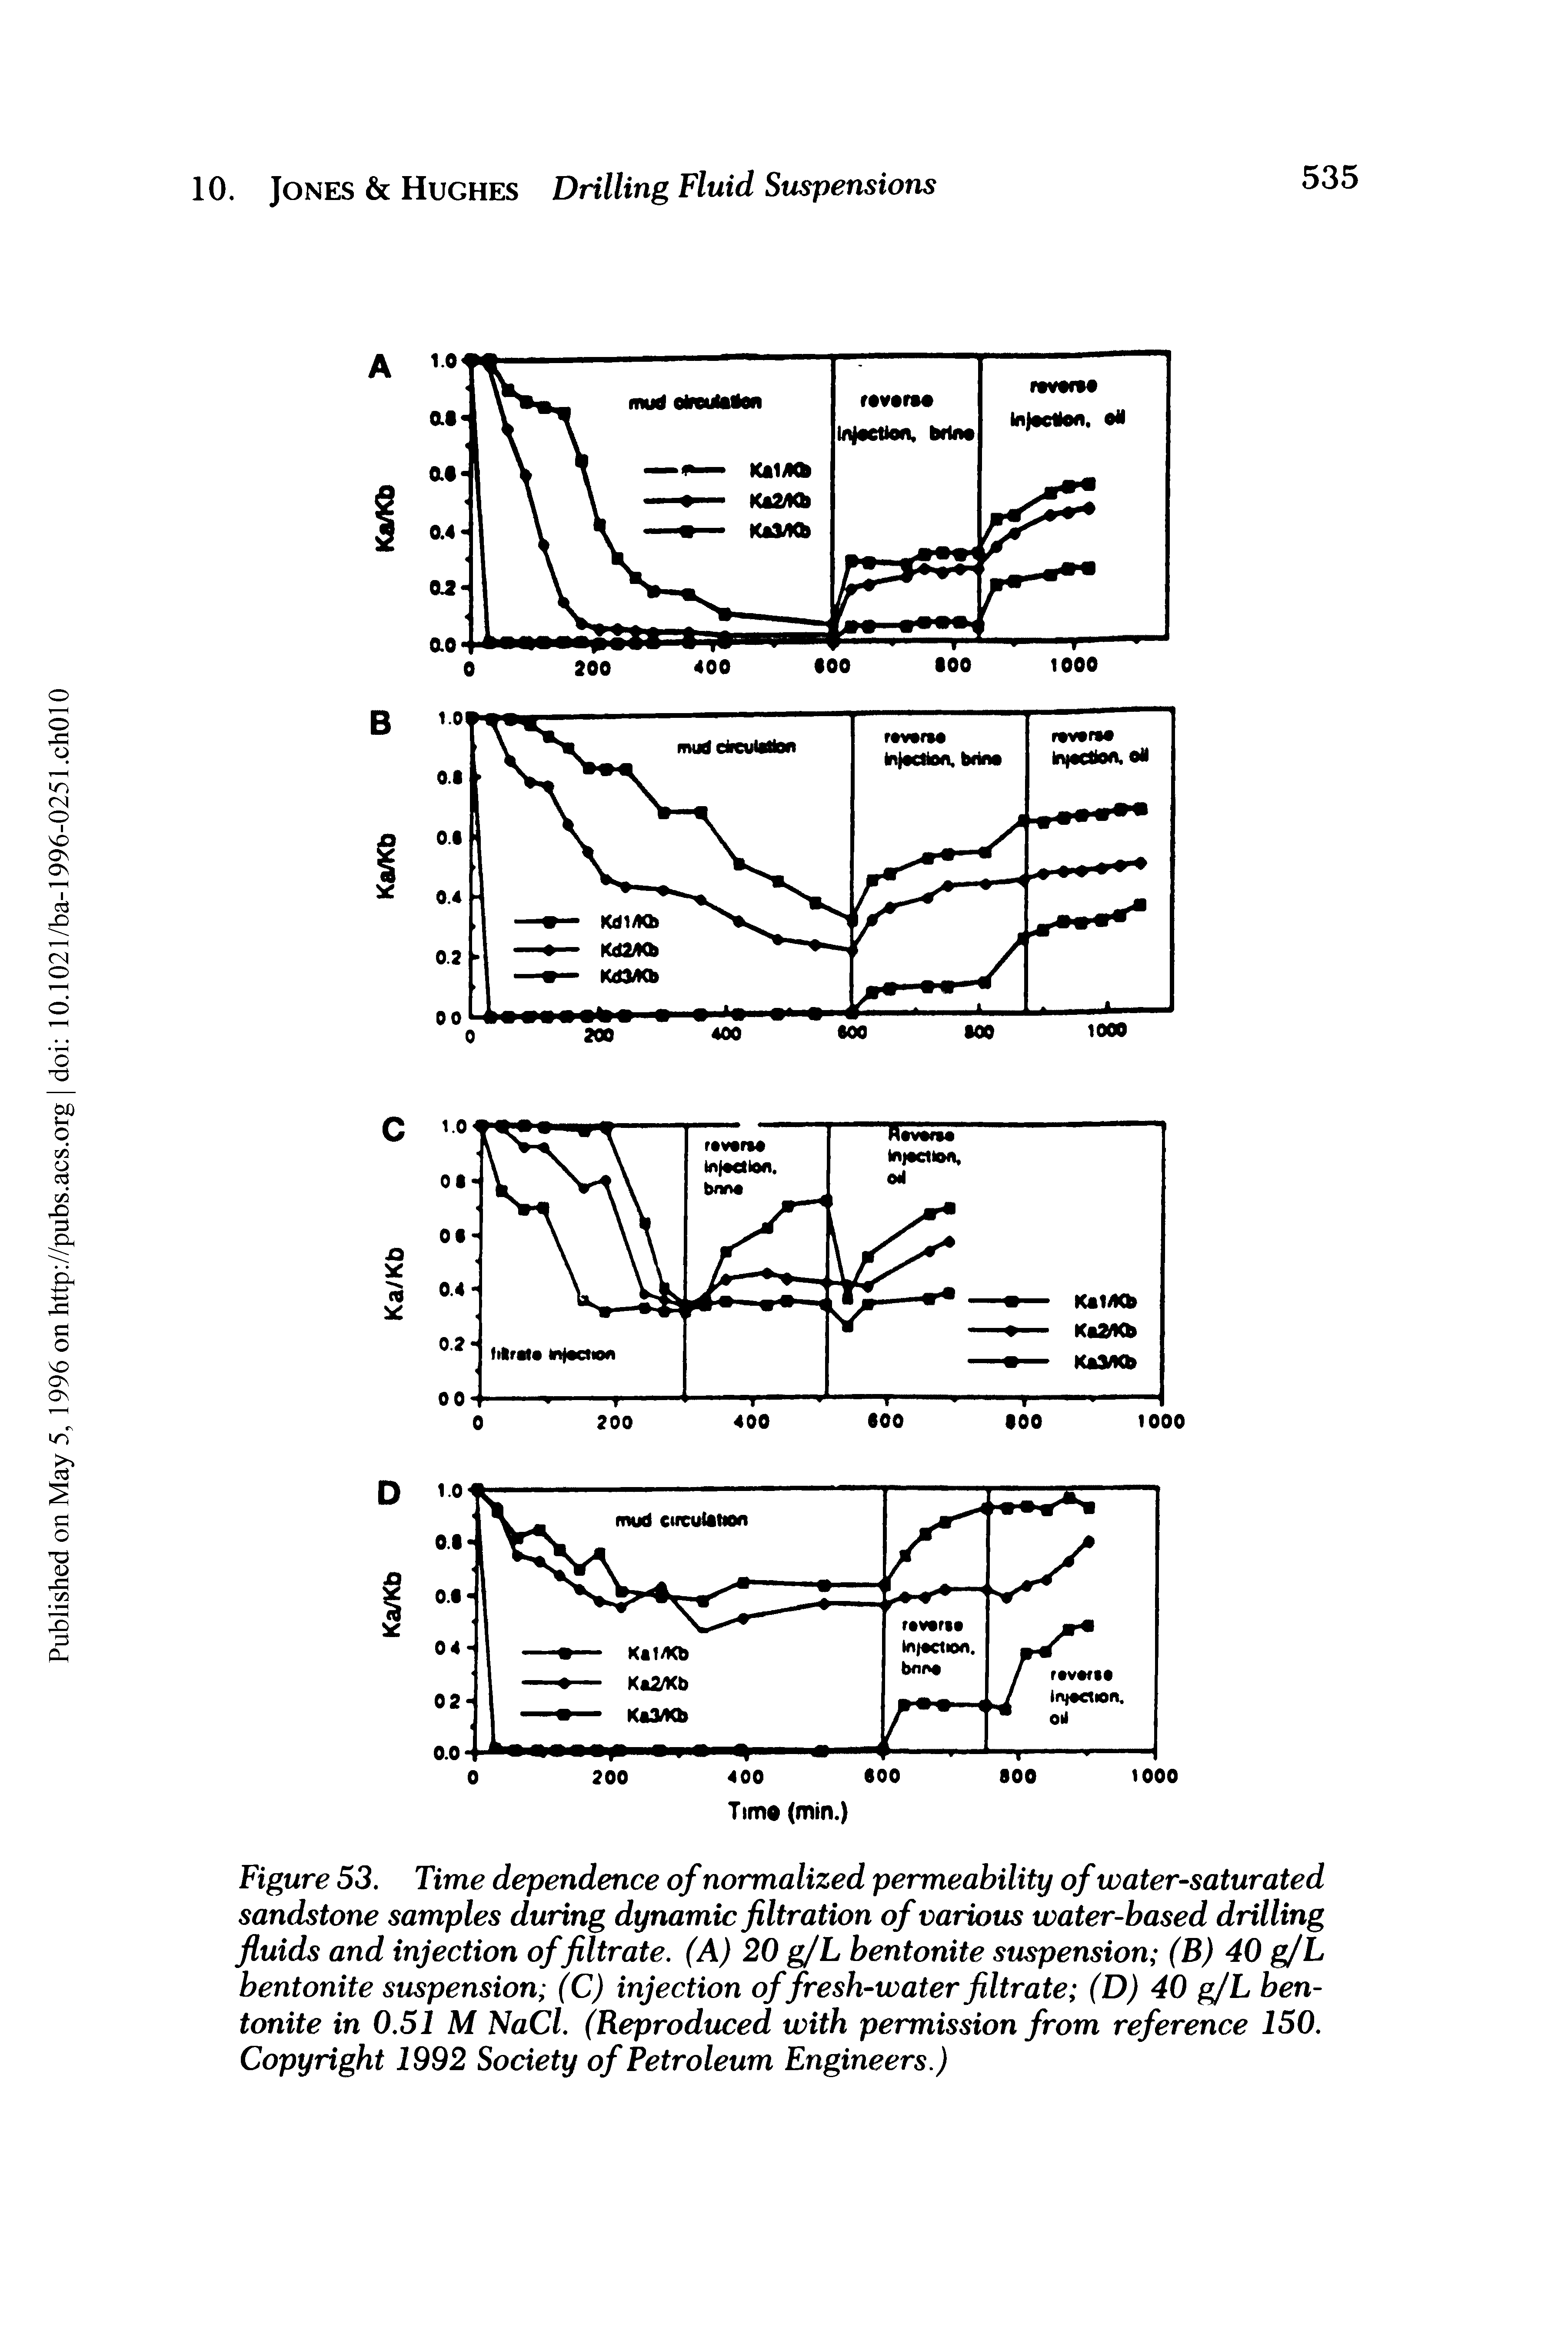 Figure 53. Time dependence of normalized permeability of water-saturated sandstone samples during dynamic filtration of various water-based drilling fluids and injection of filtrate. (A) 20 gjL bentonite suspension (B) 40 gjL bentonite suspension (C) injection of fresh-water filtrate (D) 40 g/L bentonite in 0.51 M NaCl. (Reproduced with permission from reference 150. Copyright 1992 Society of Petroleum Engineers.)...